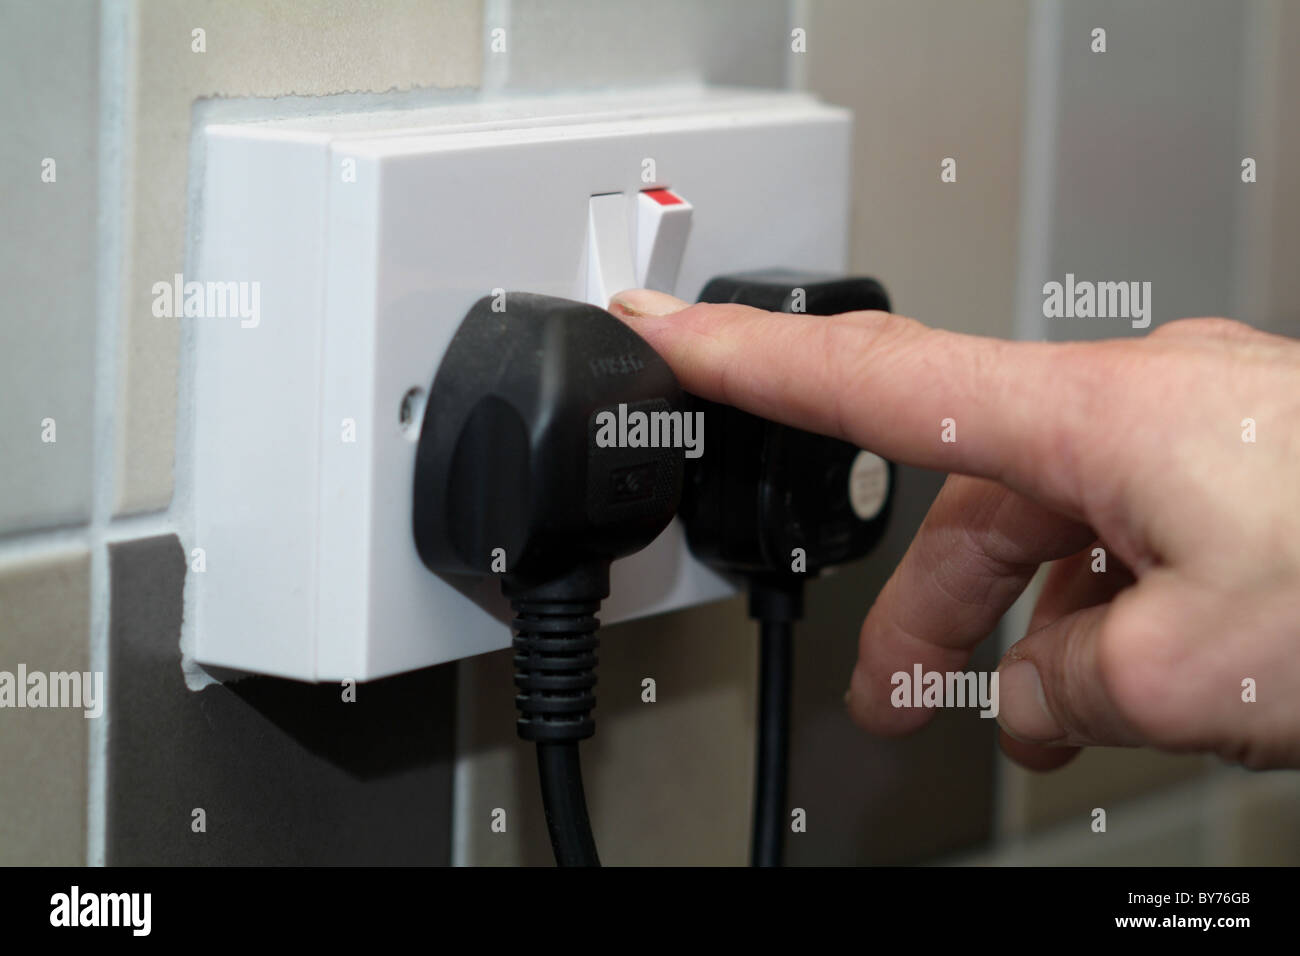 Someone switching on an electrical socket Stock Photo